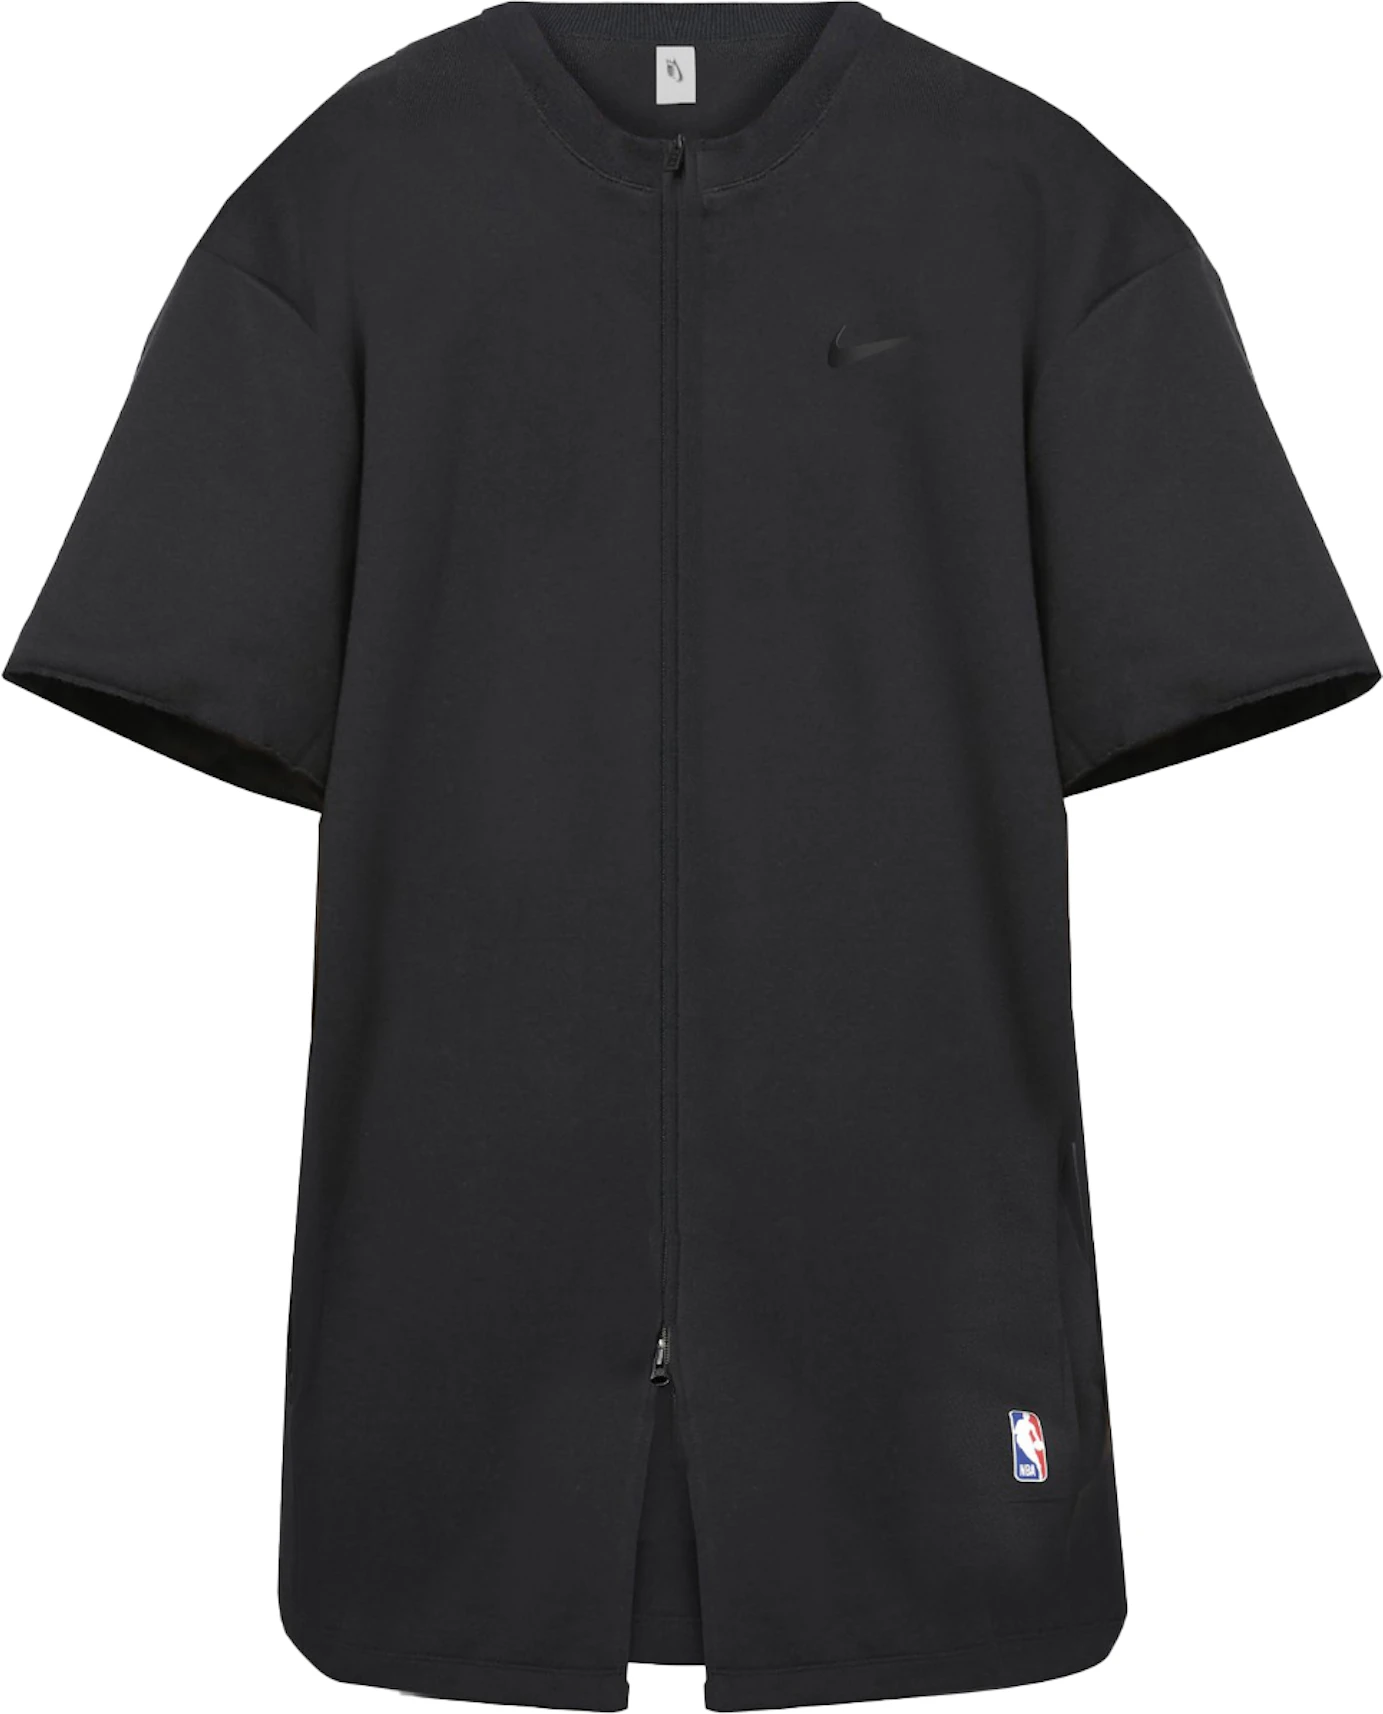 FEAR OF GOD Nike Warm Up Jacket Black XS新品未使用タグ付き - T ...